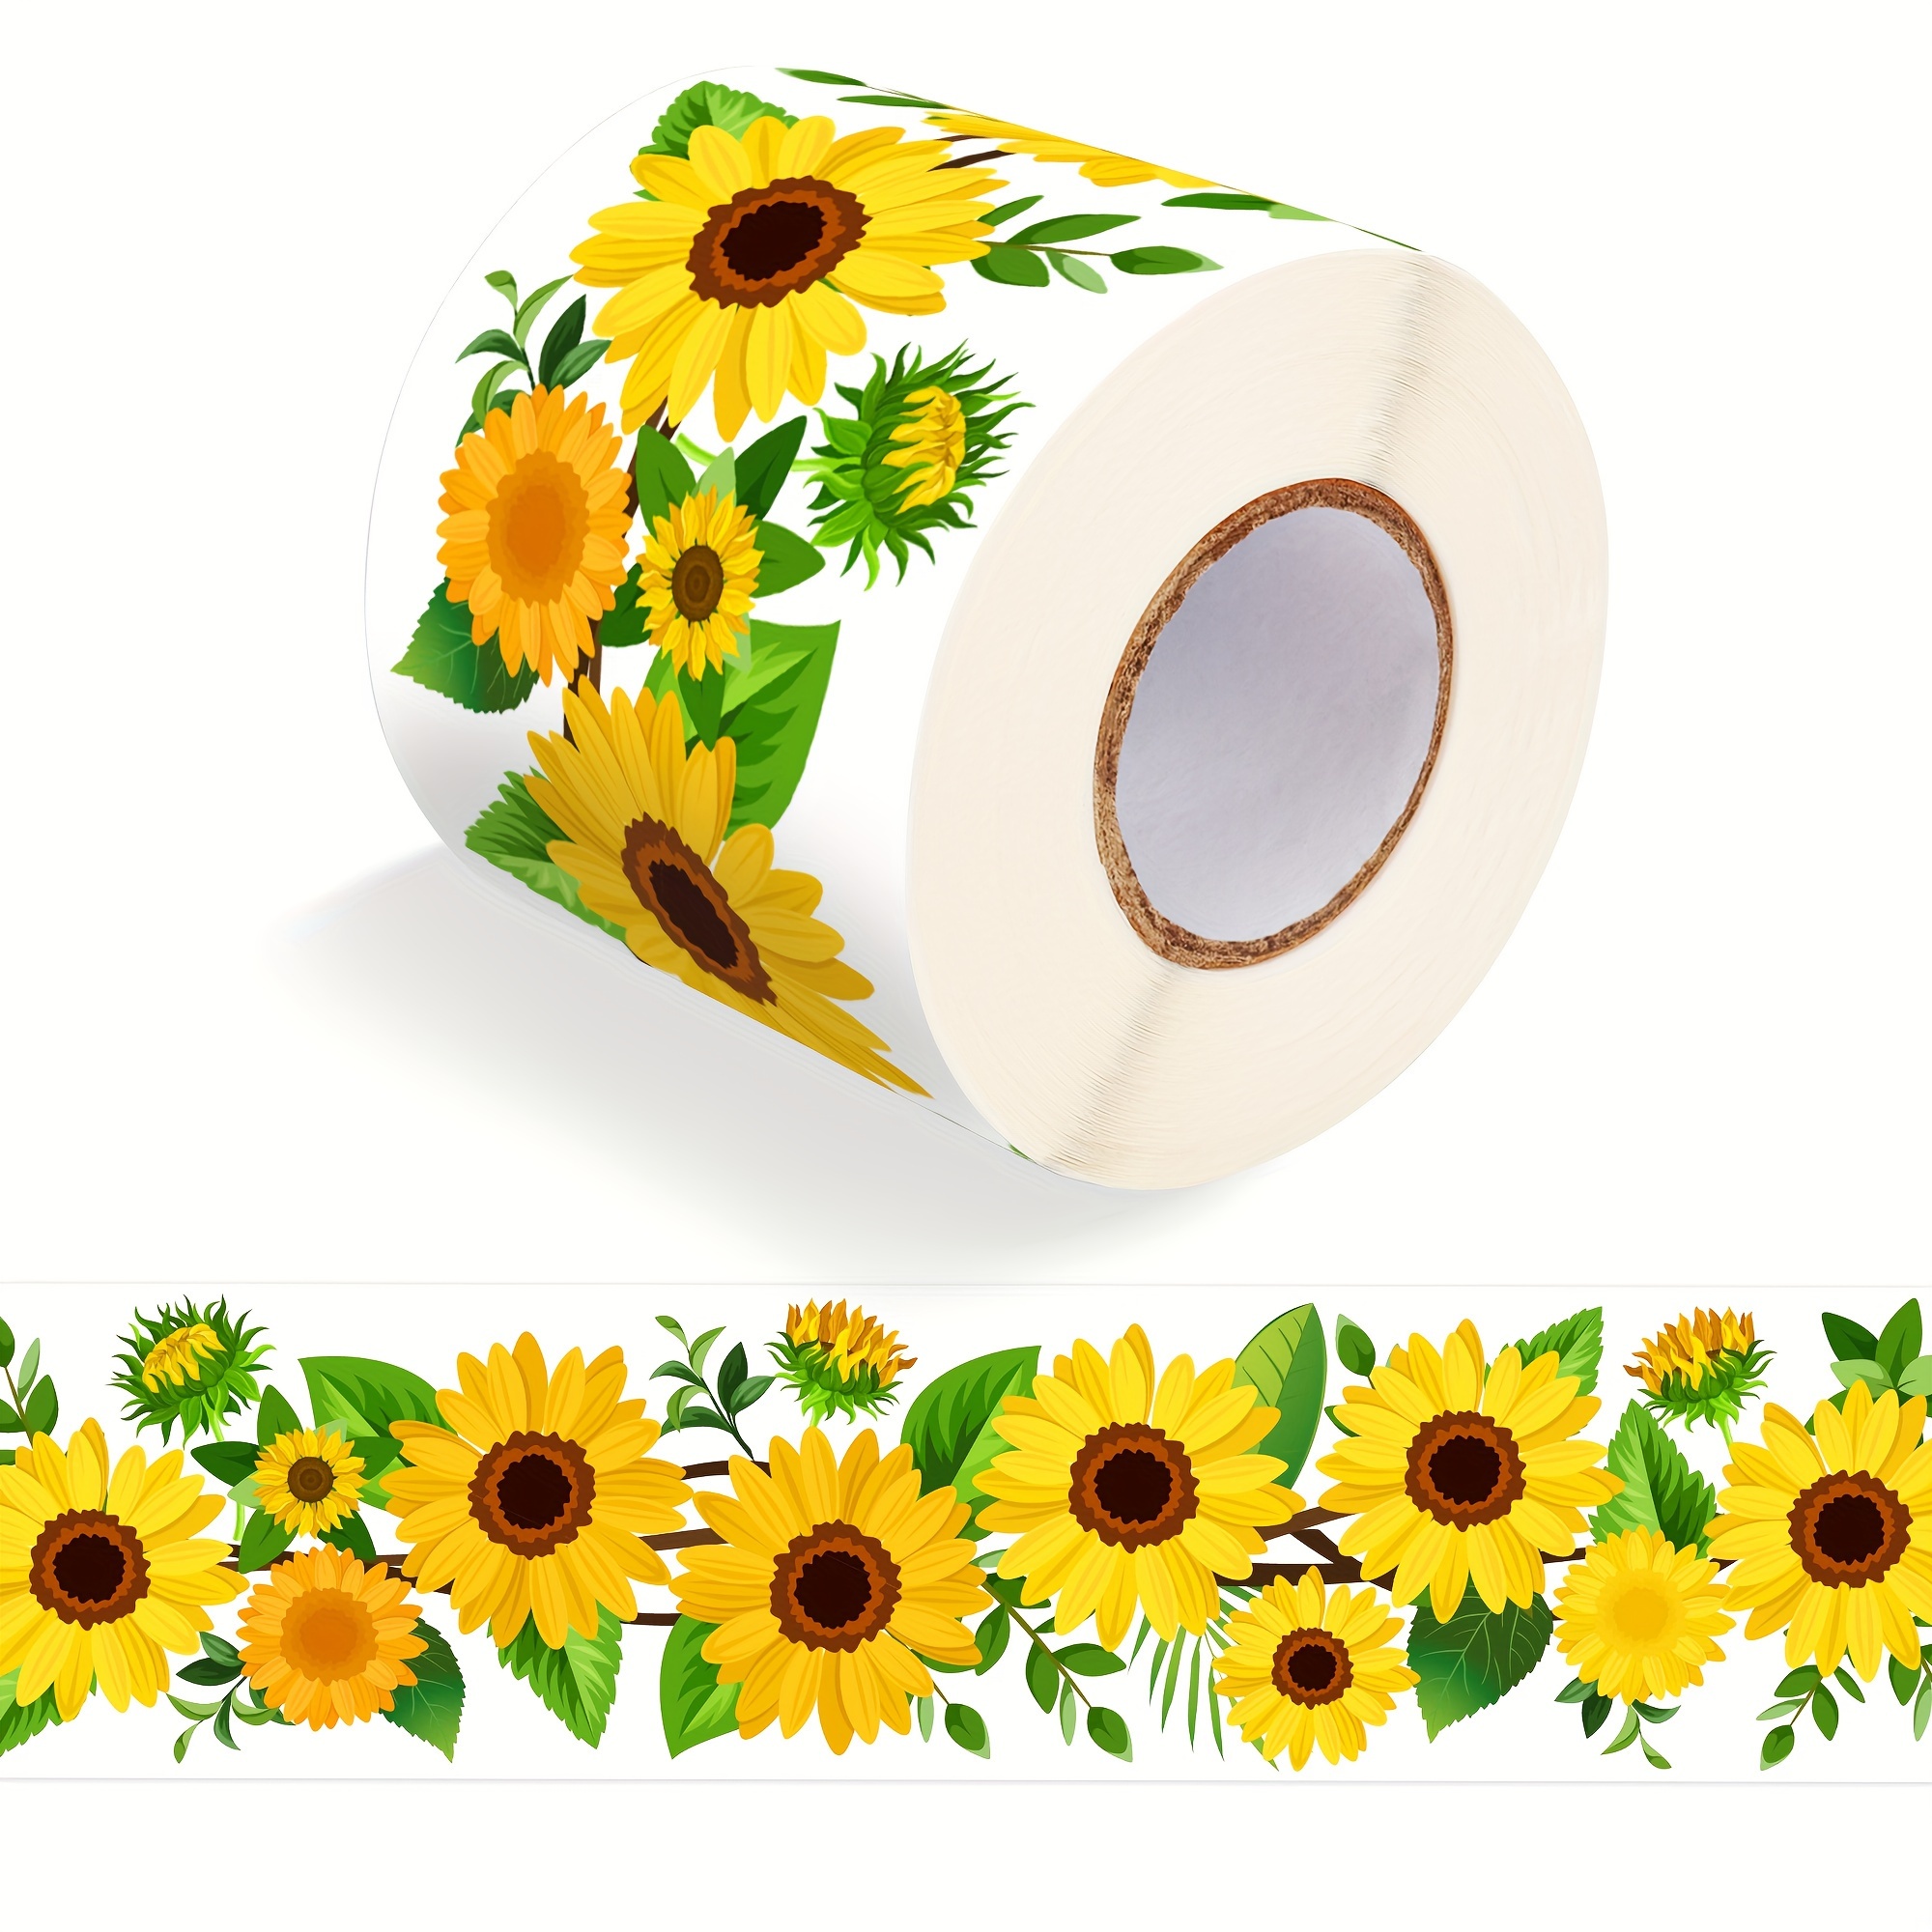 

Sunflower Bulletin Board Border Trim, 65.6ft Self-adhesive Decorative Paper Border For Classroom Decoration, Spring/summer School Classroom Photo Wall Trim With Bright, Waterproof Design